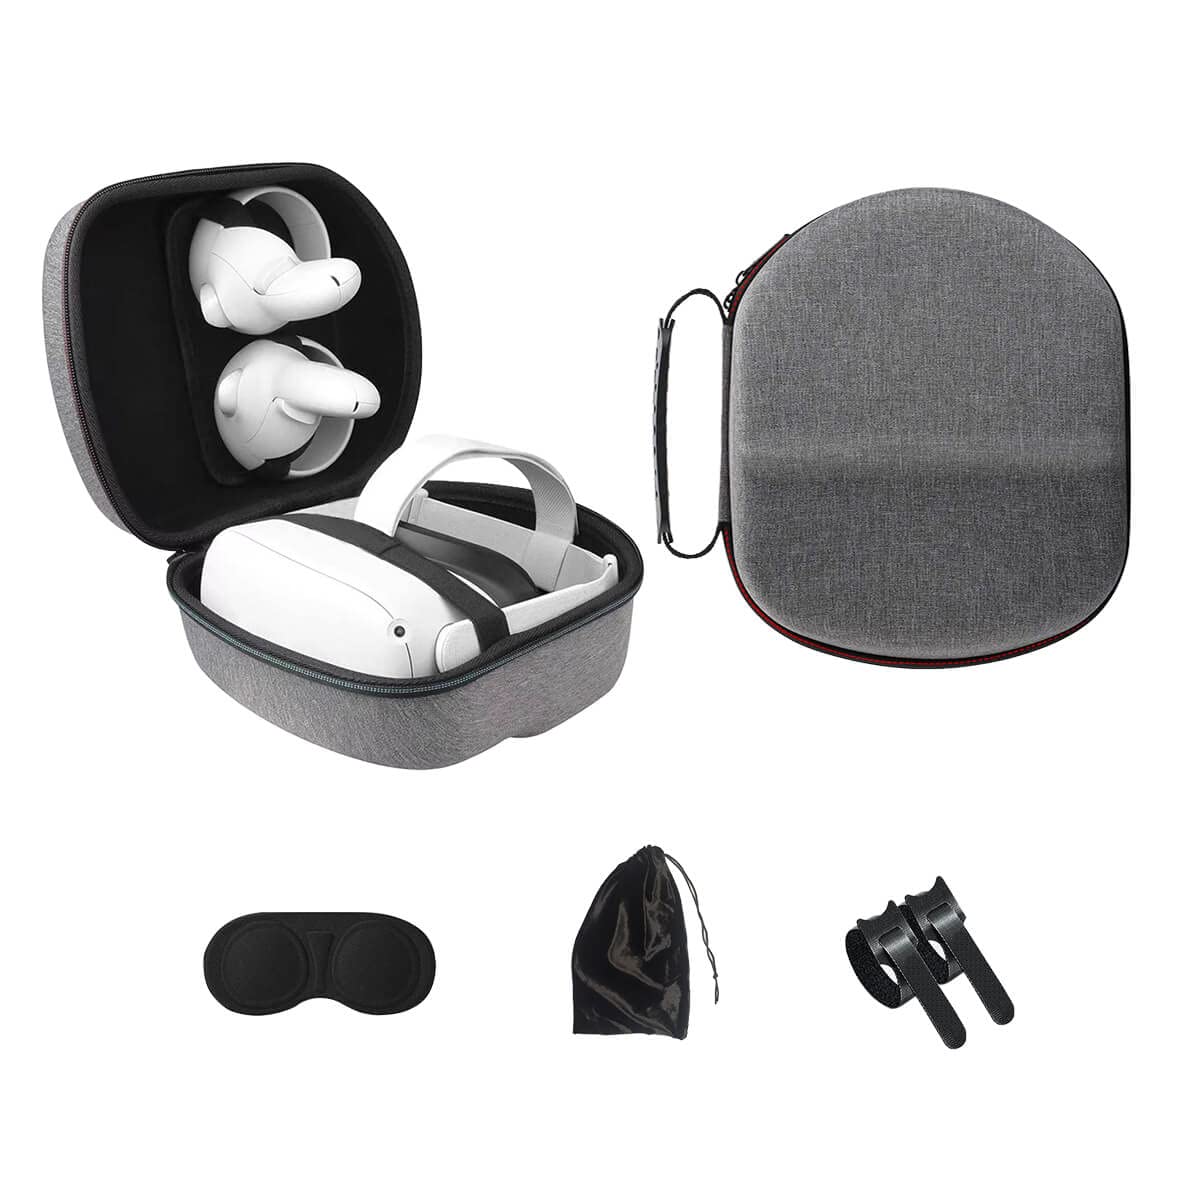 dethinton for Oculus Quest 2 Case, Travel Case for Oculus Quest 2 All-in-one VR Gaming Headset and Controllers Includes Multiple Oculus Quest 2 Accessories (Gray)